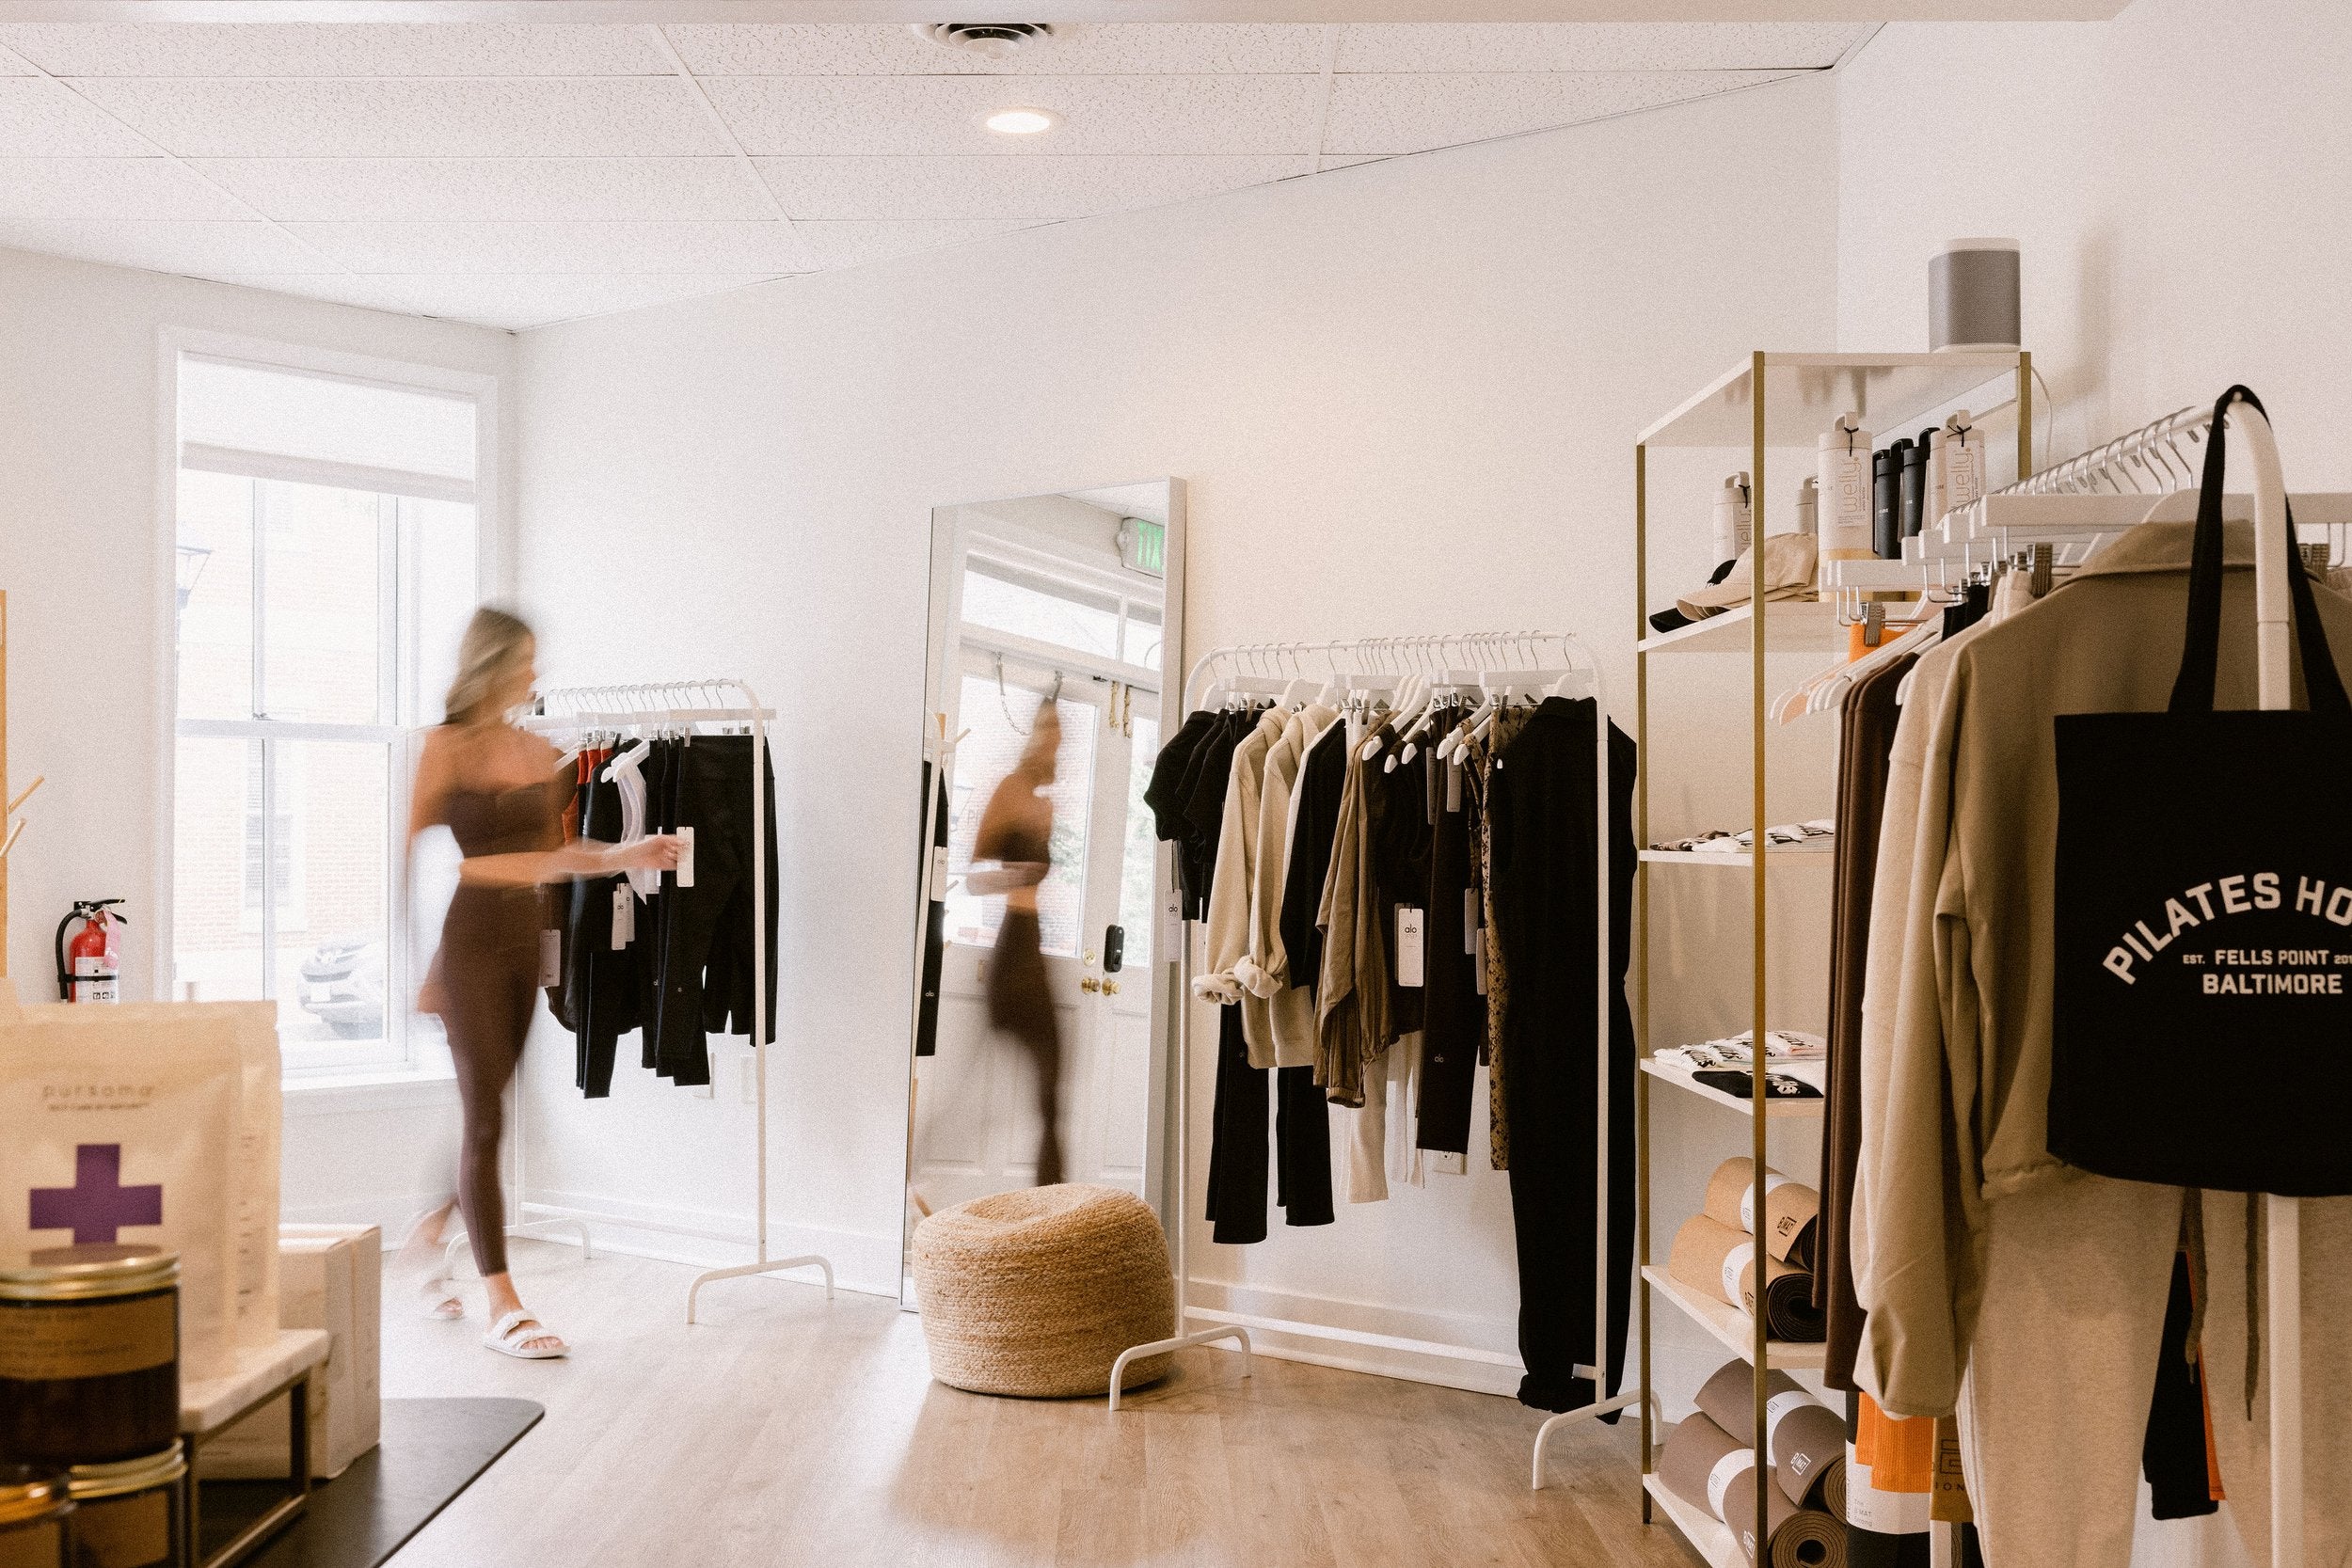 Learn how to increase your Pilates studio's revenue by selling merchandise!